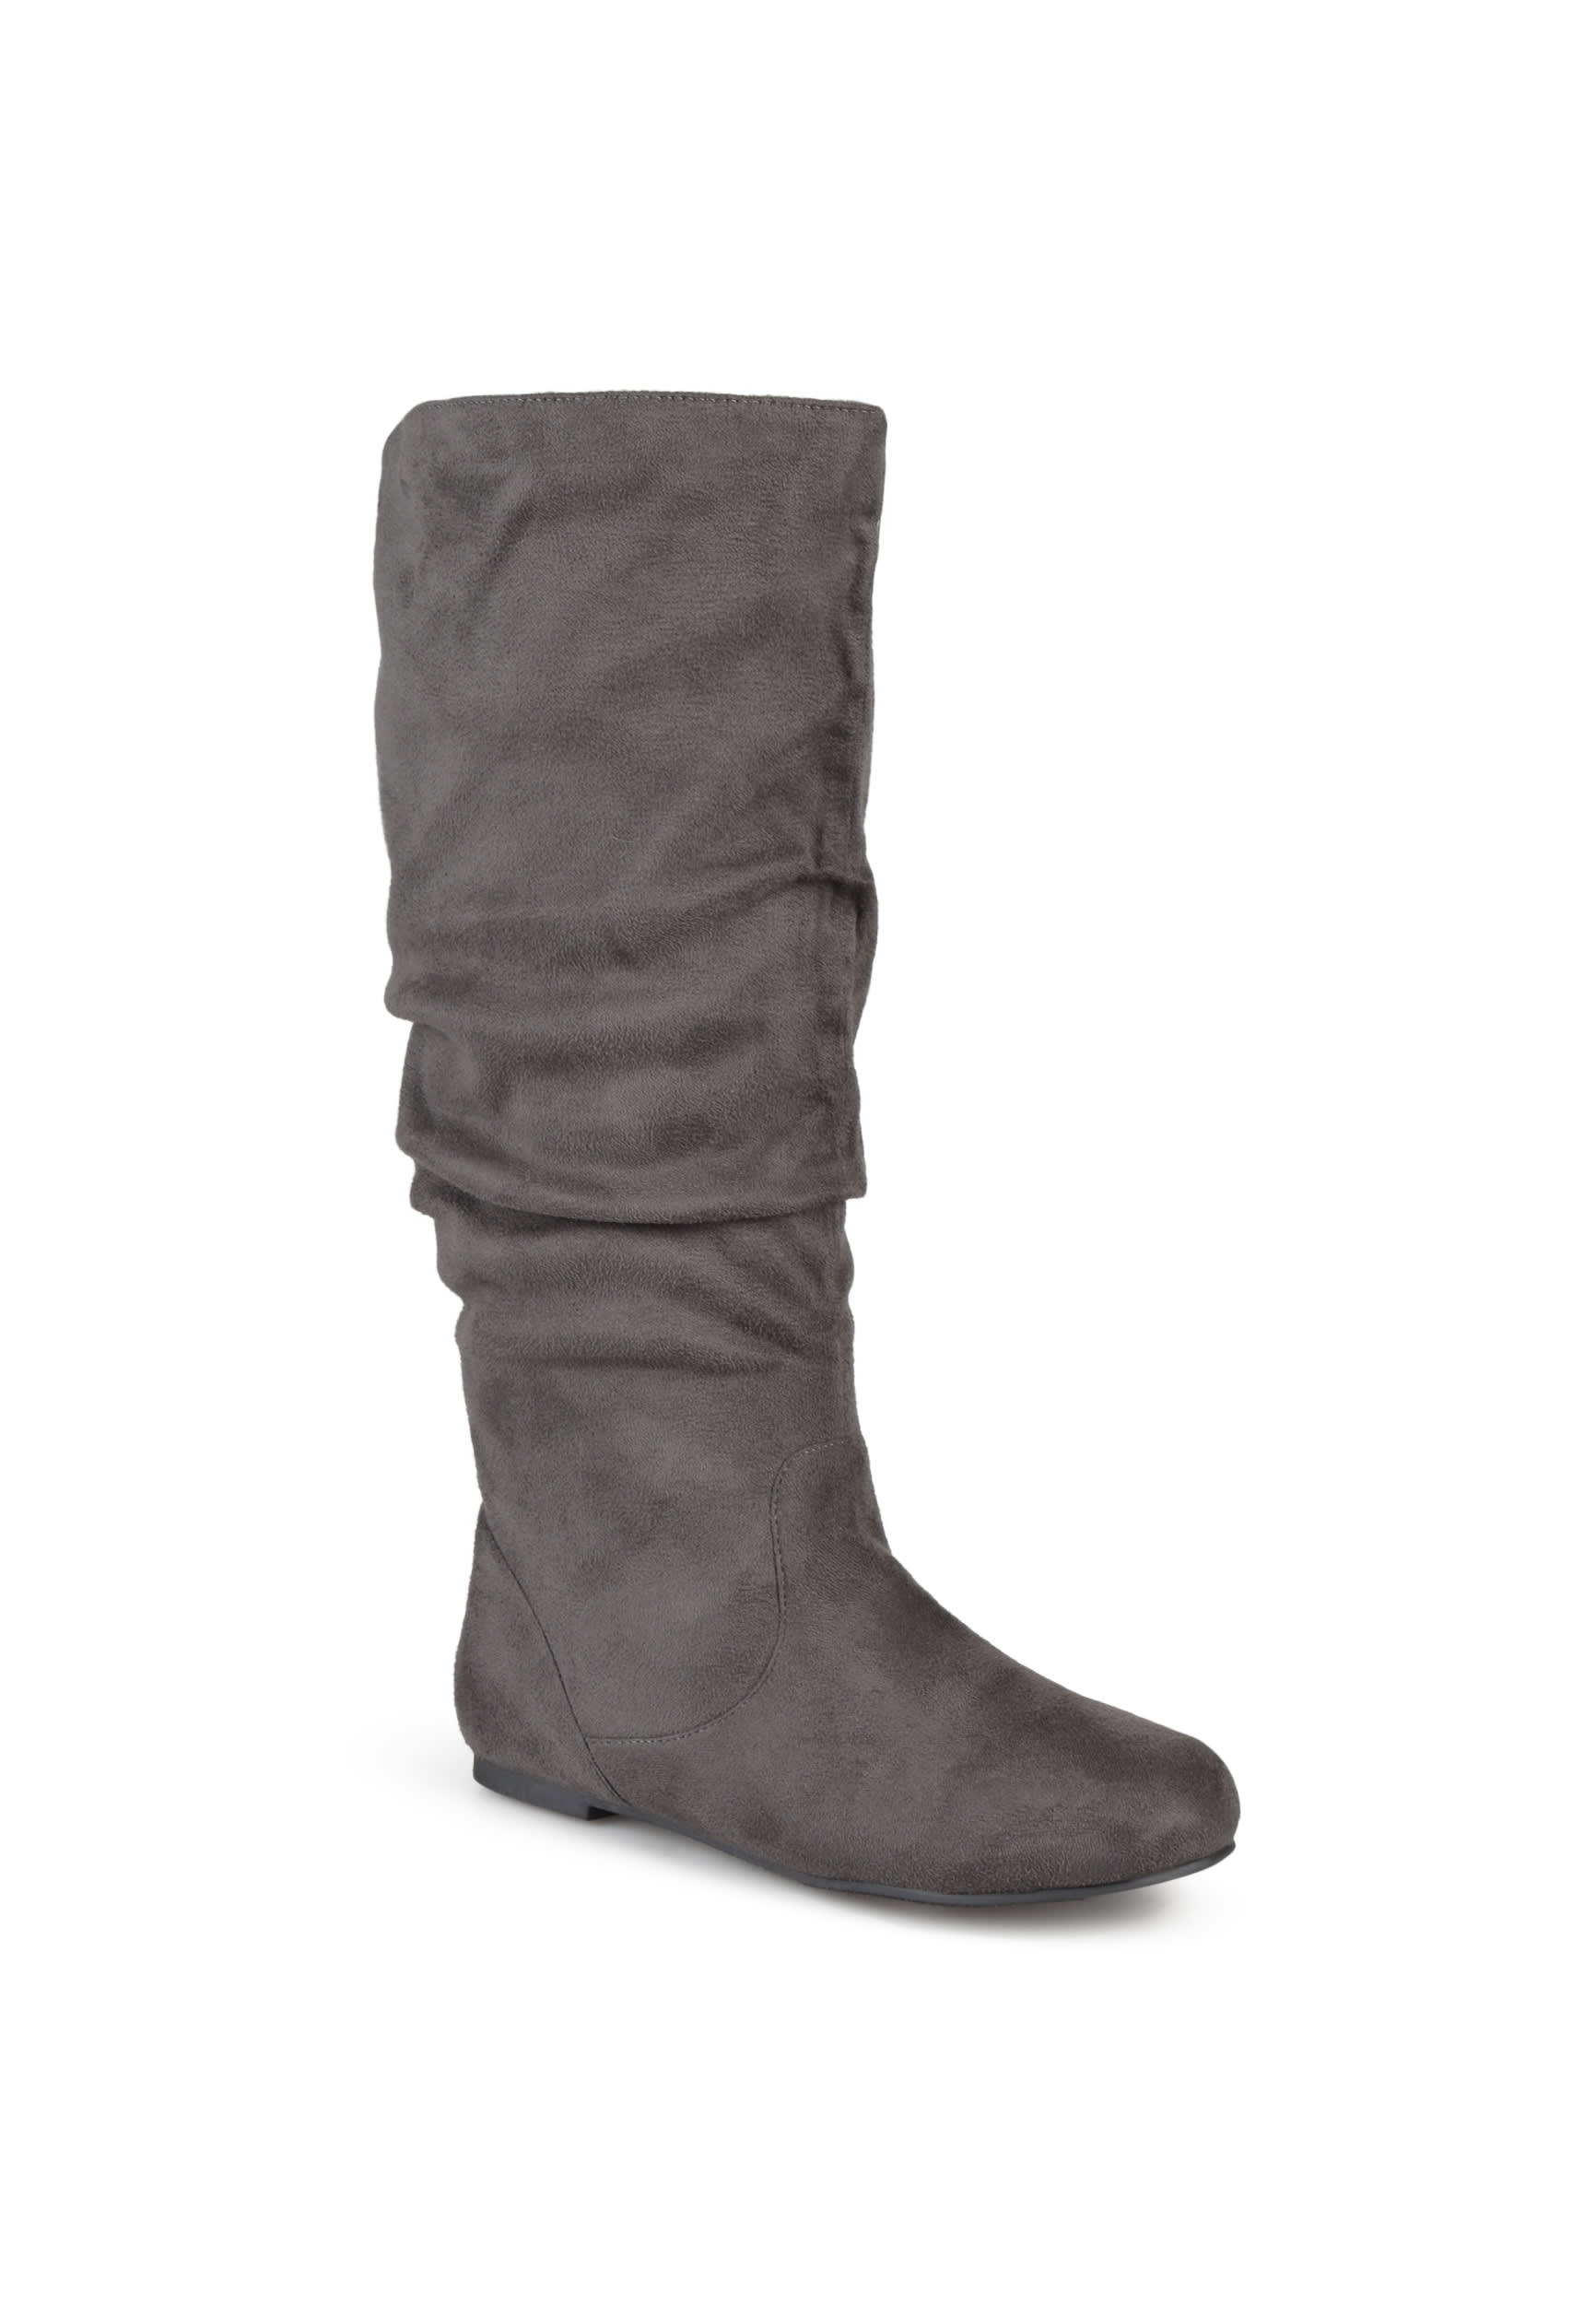 Journee Collection Rebecca Womens Wide Calf Boot | maurices